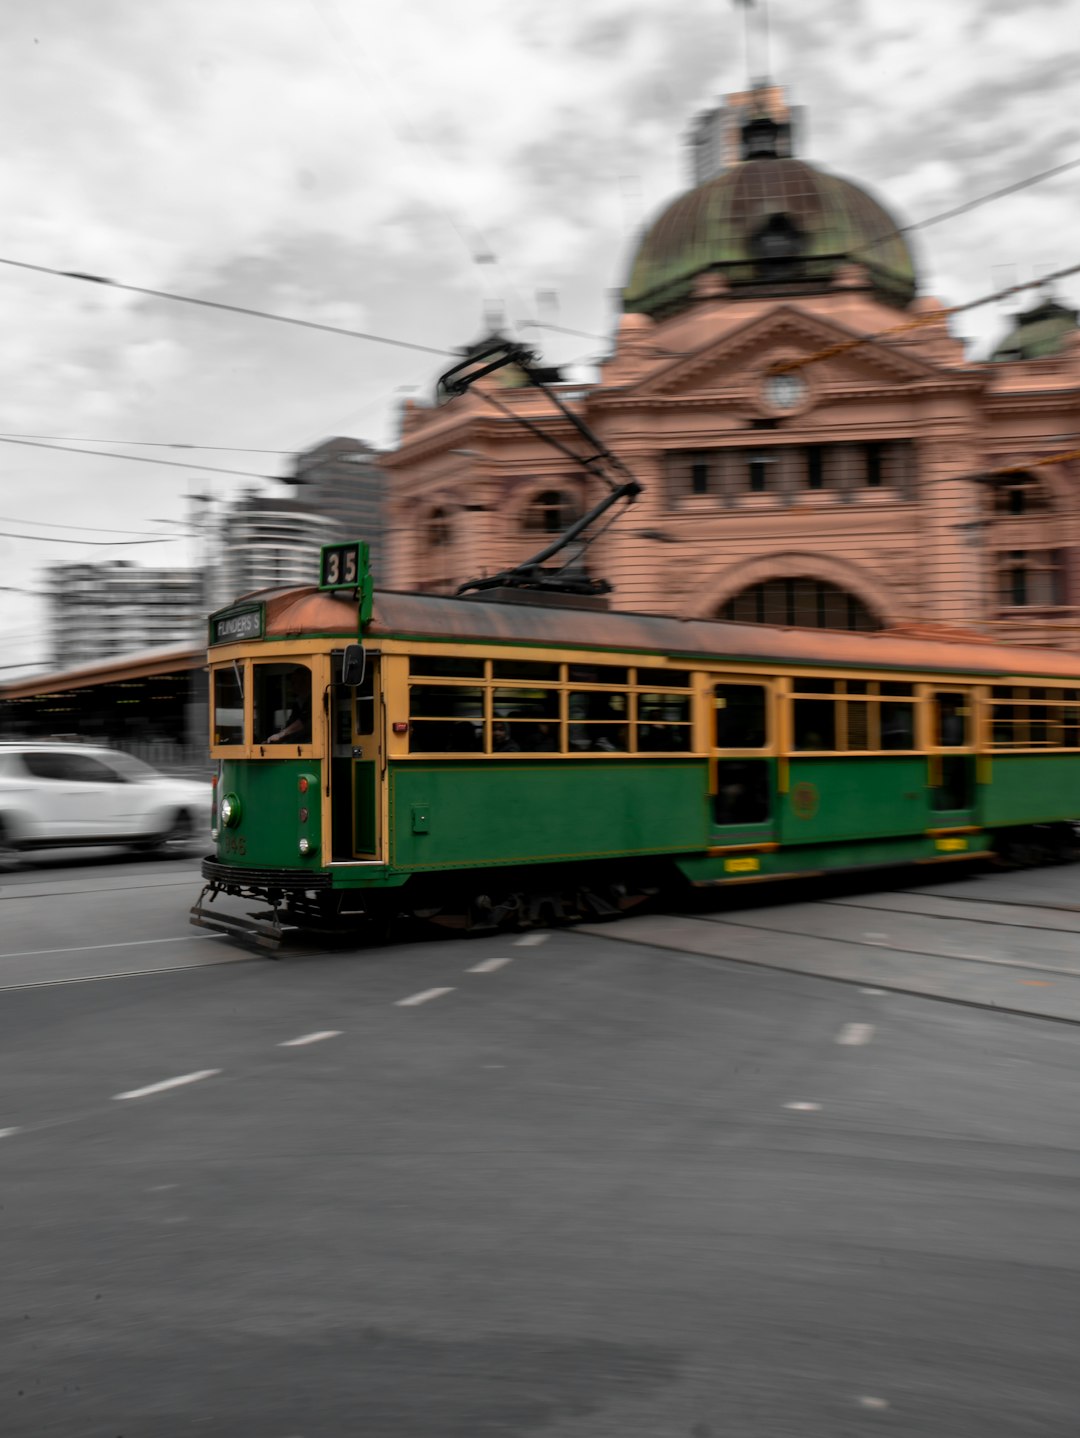 green and yellow tram on road during daytime